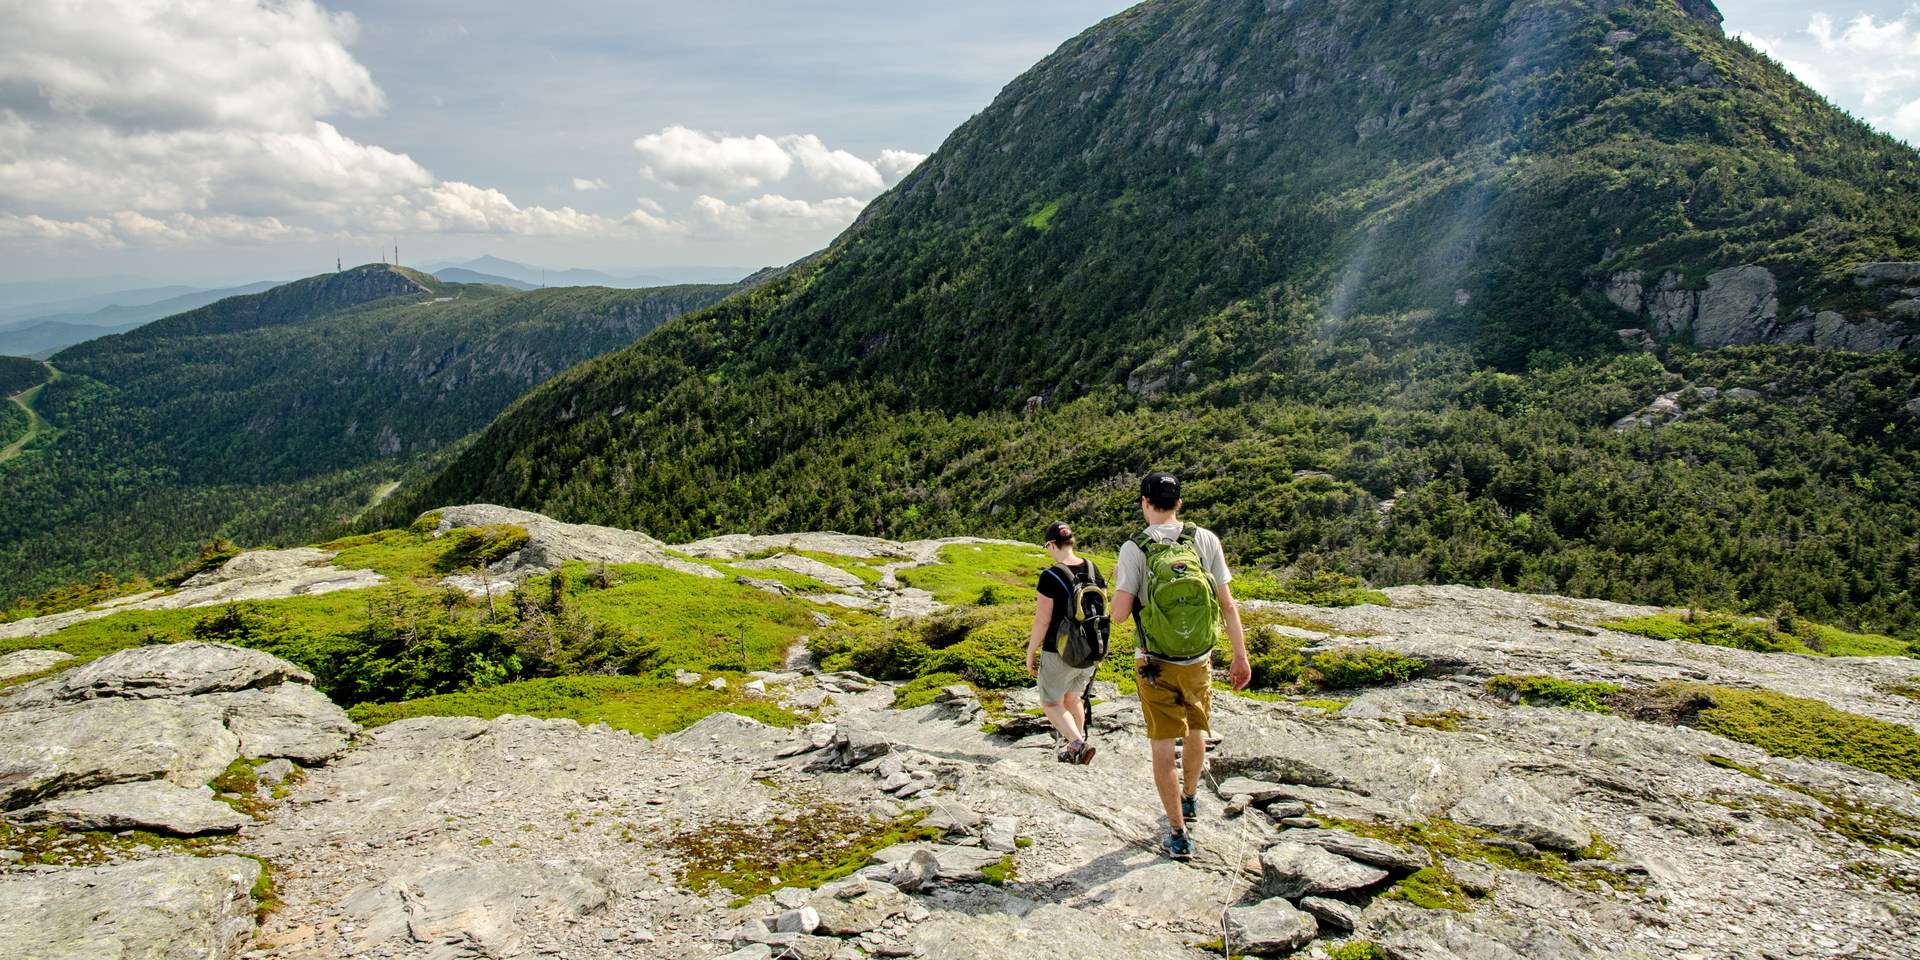 Mount Mansfield via Hell Brook + Long Trails